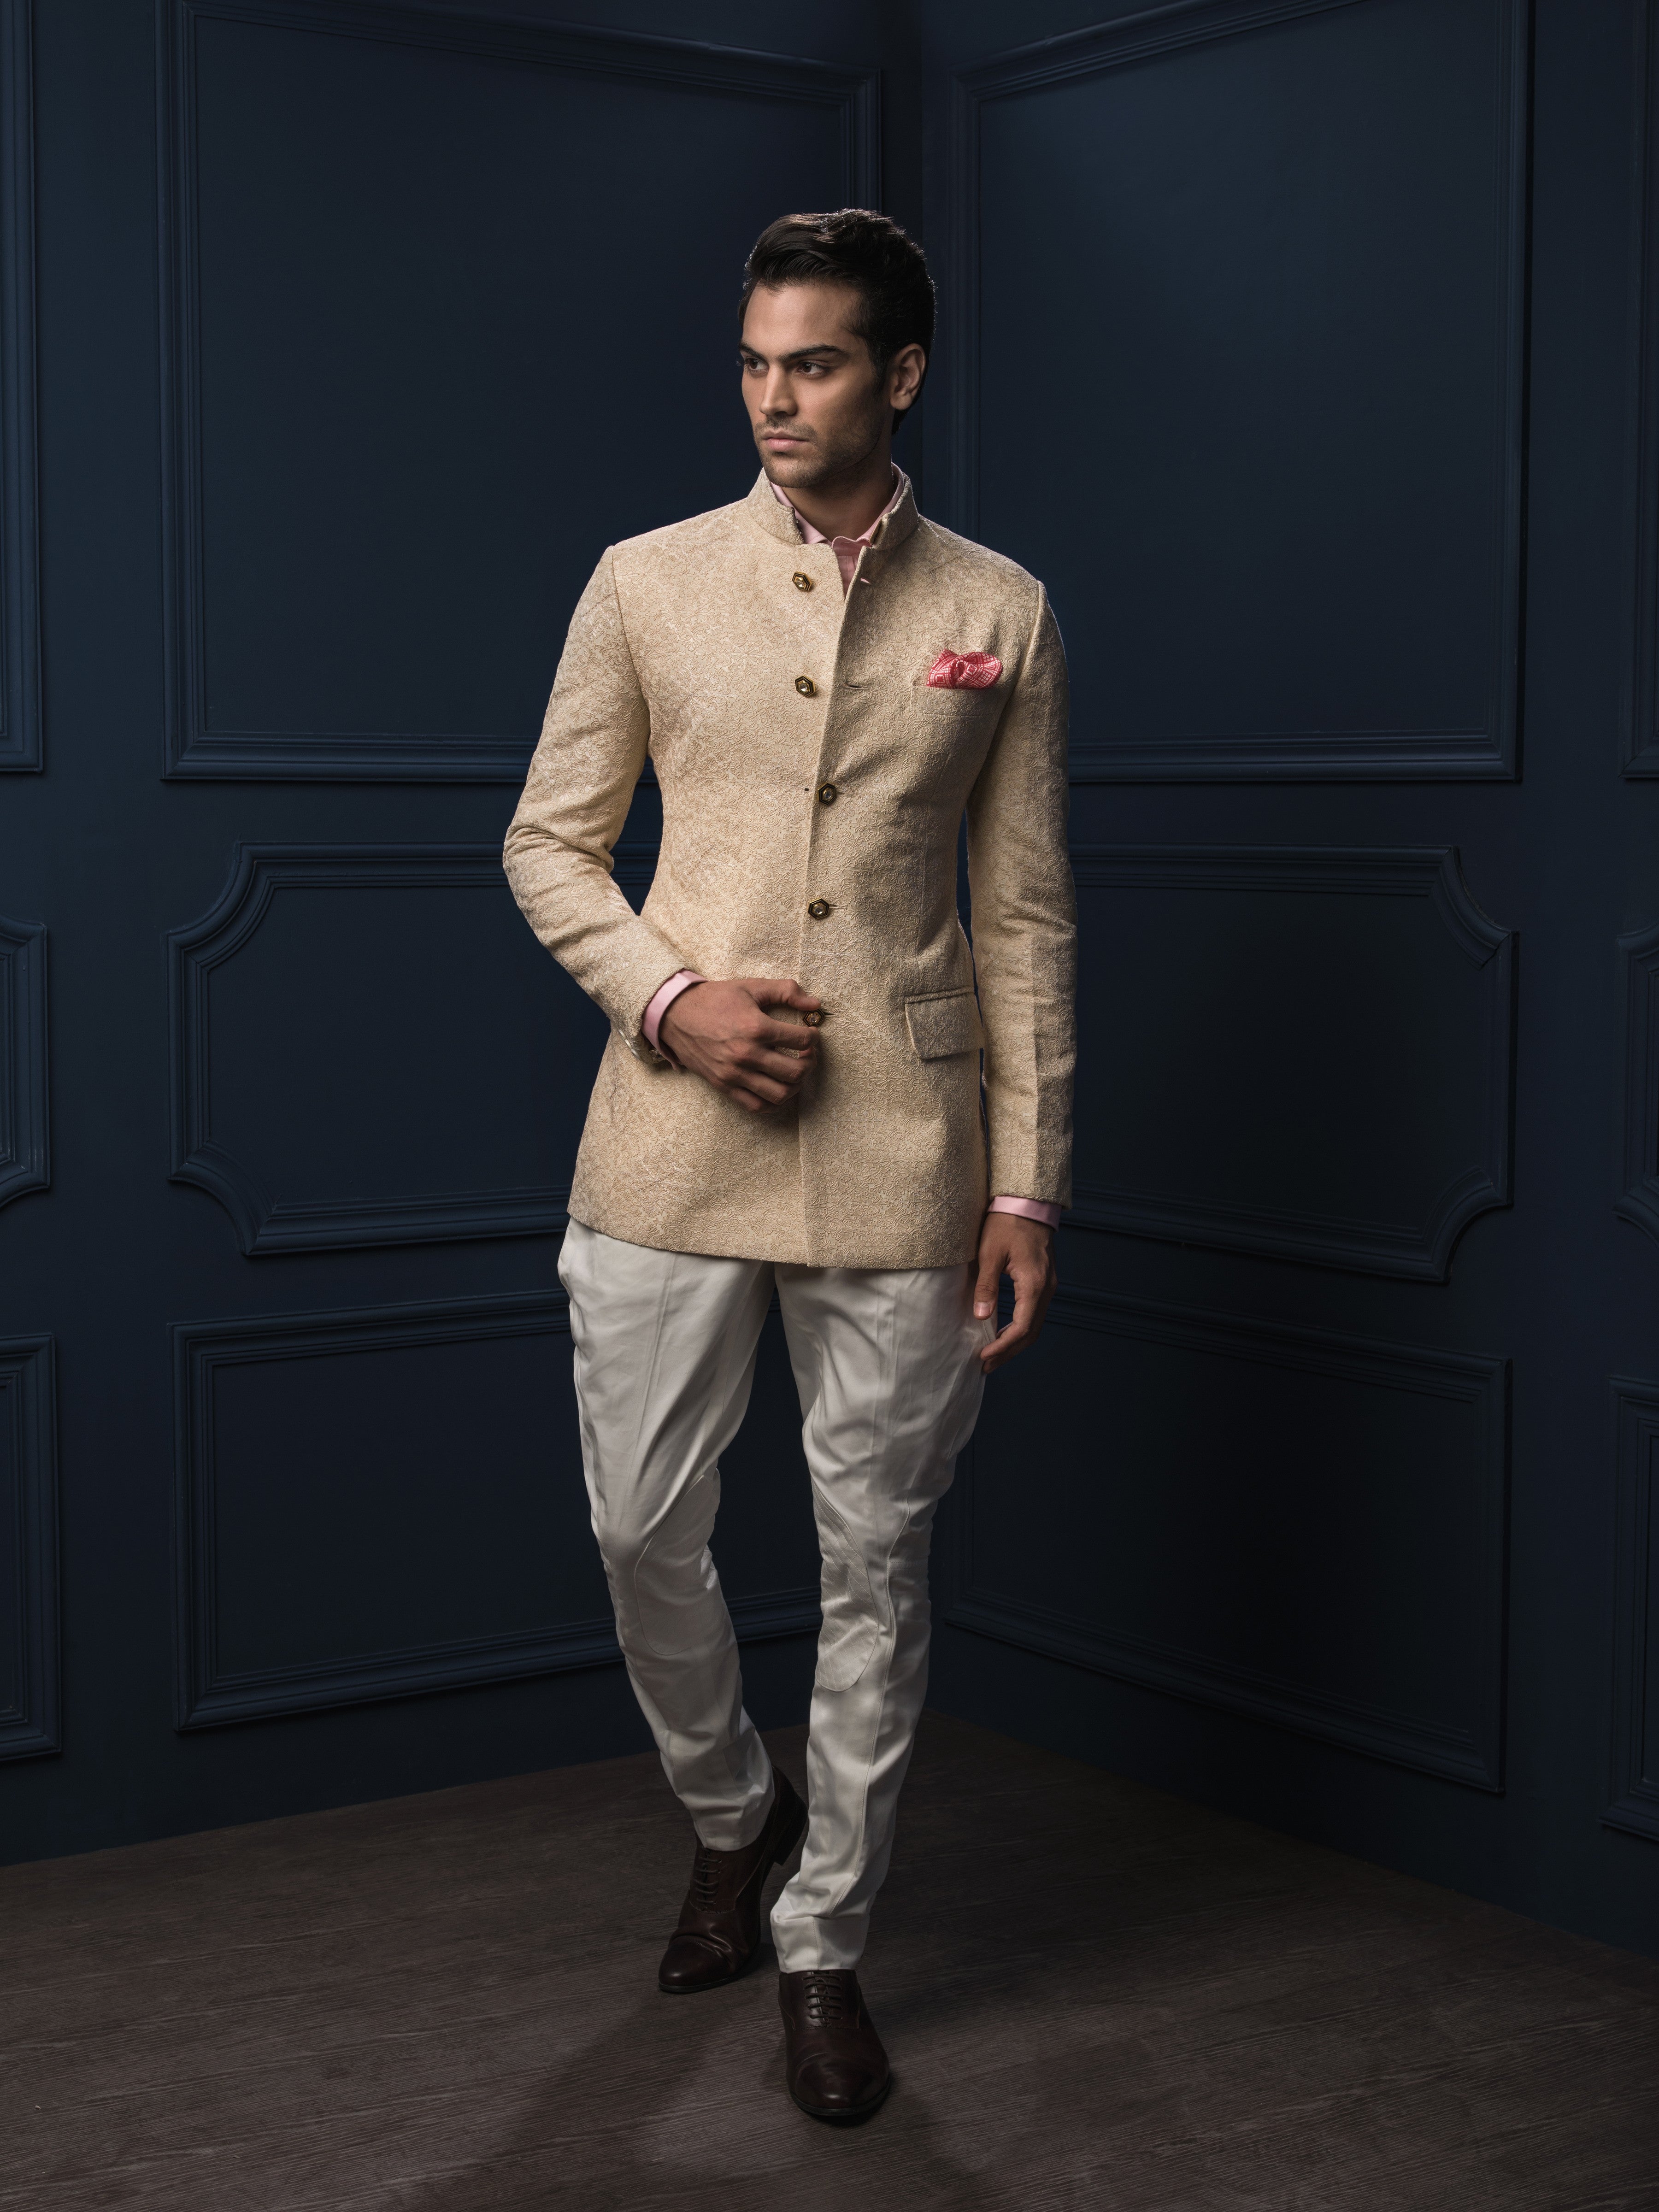 Buy The Rich Look Designer 5 Button Bandhgala/Jodhpuri Suit Casual | Formal  for Men's Available in 5 Size | Bandhgala Suit with Trouser (44, Camel) at  Amazon.in